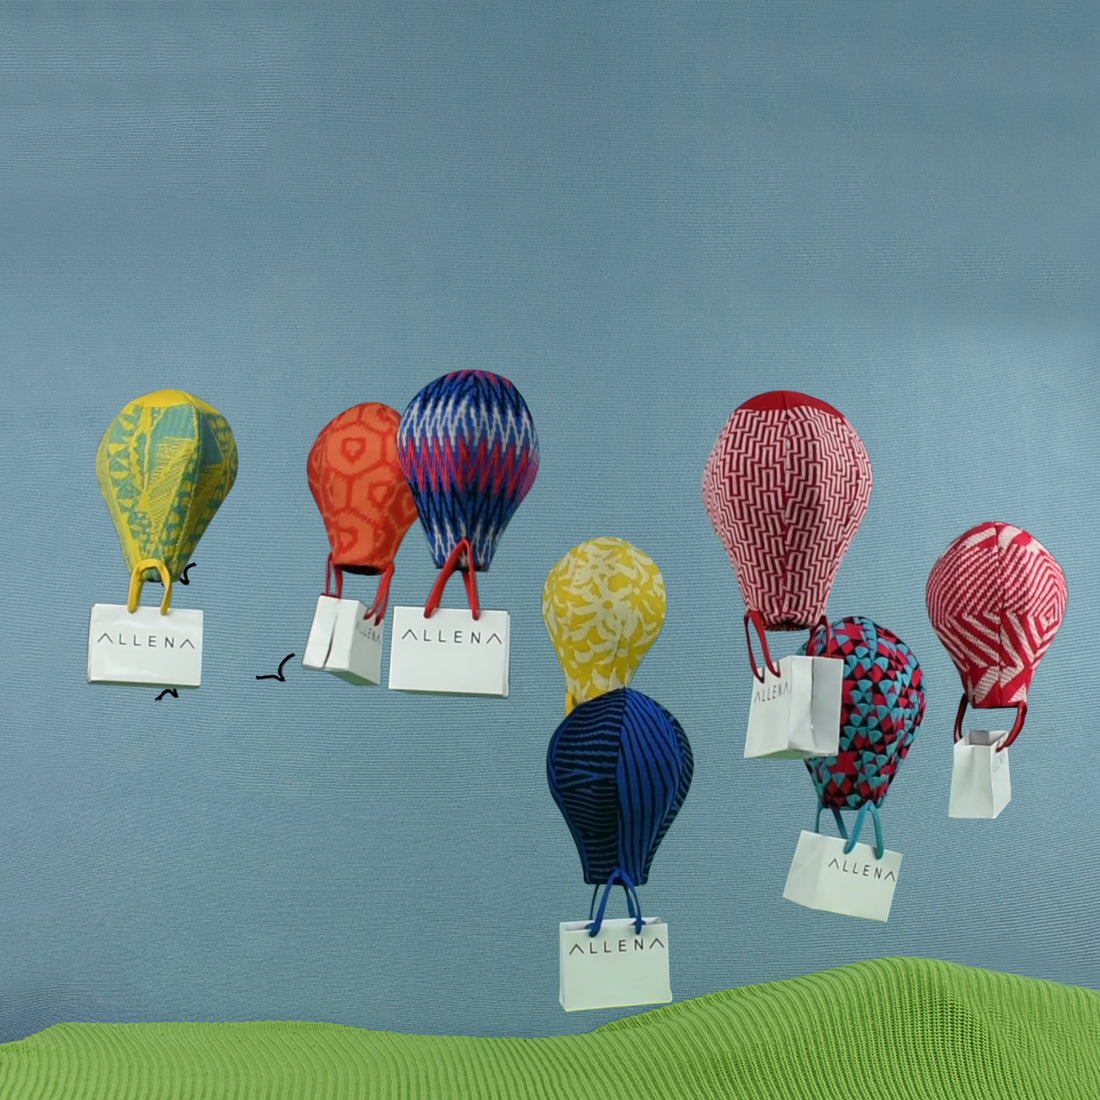 Balloons made of Legacy patterns depicting small businesses taking off. By allena